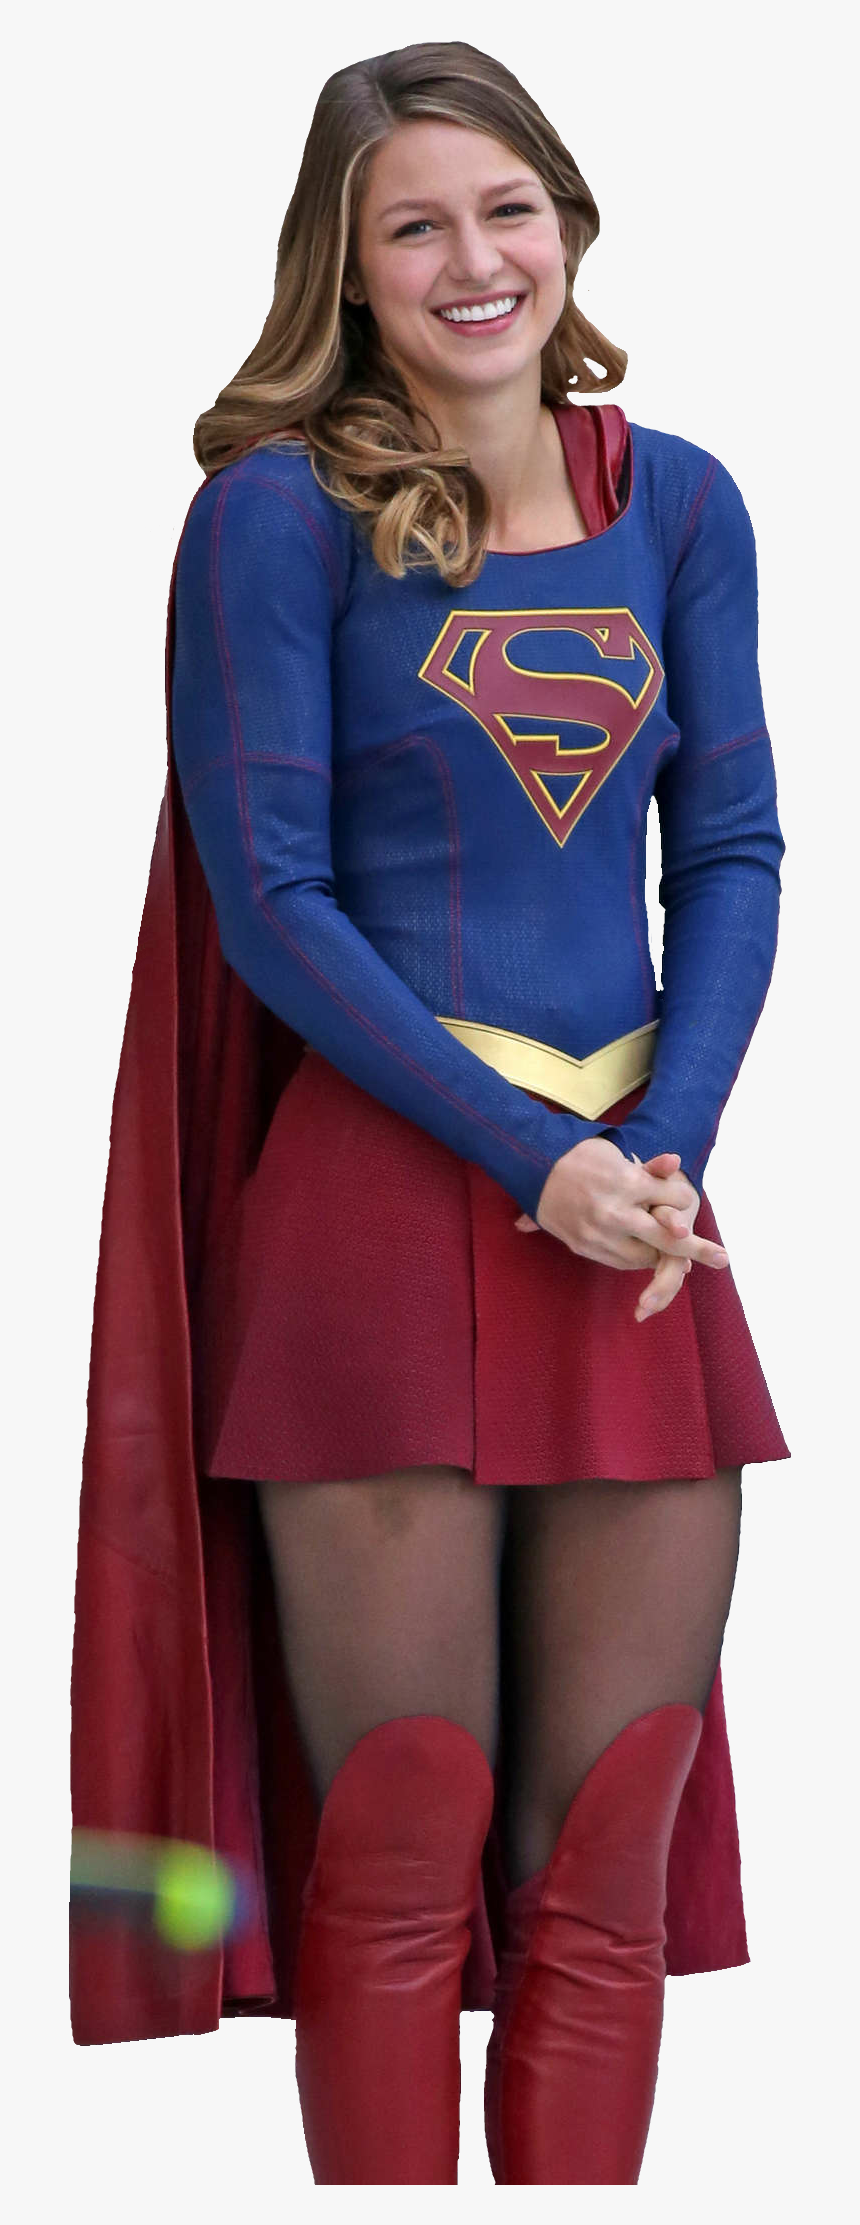 Sexy supergirl pictures